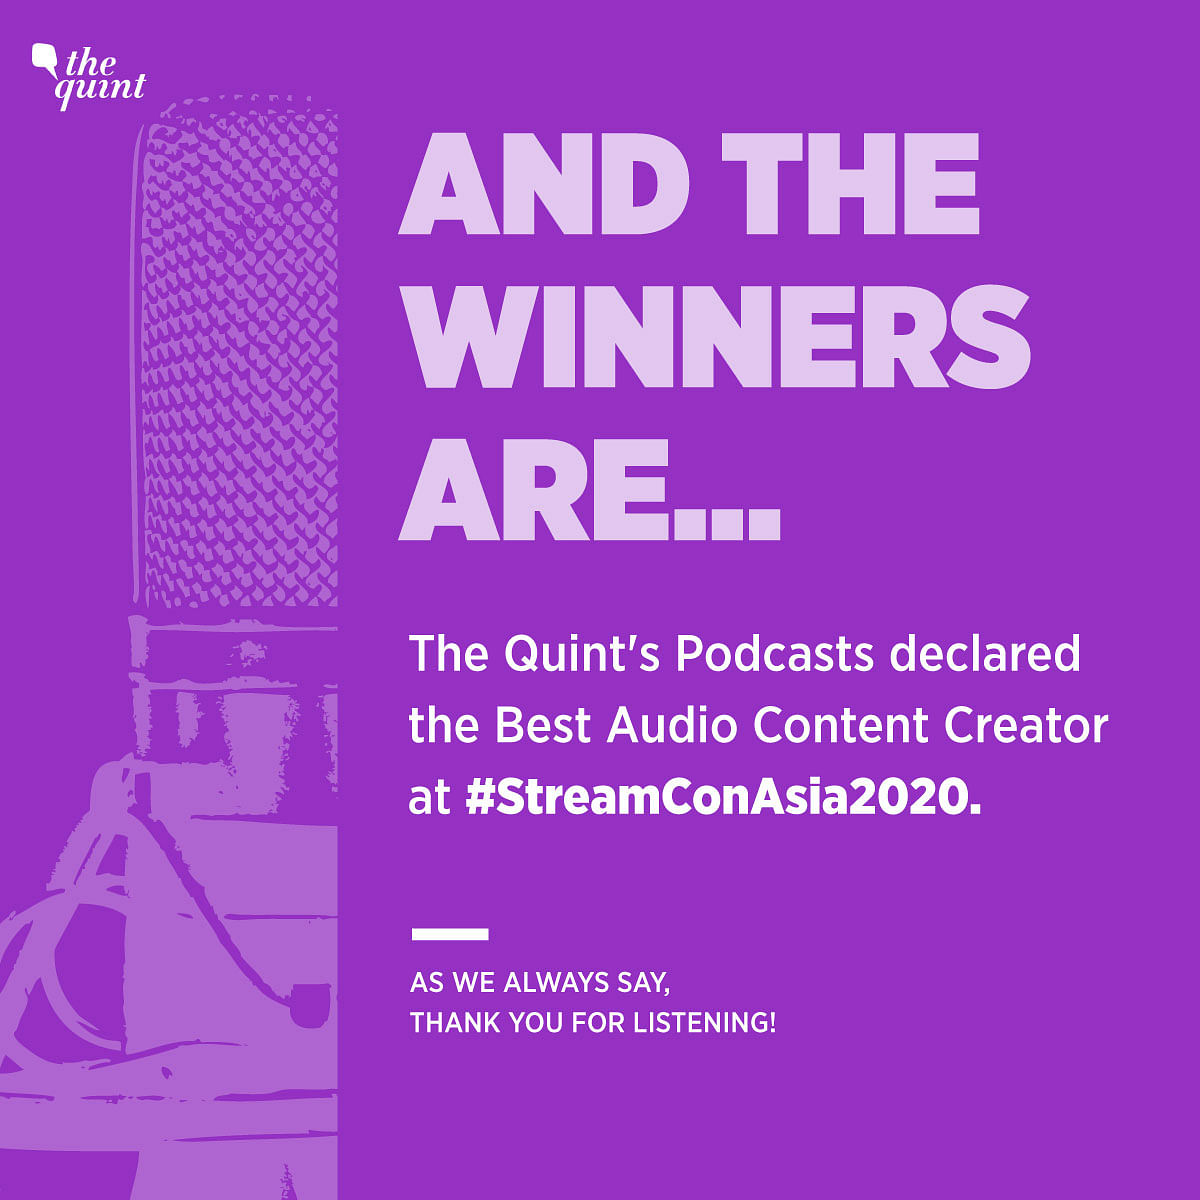 The  Quint’s team has won three awards in the 2nd edition of StreamCon Asia Awards 2020.